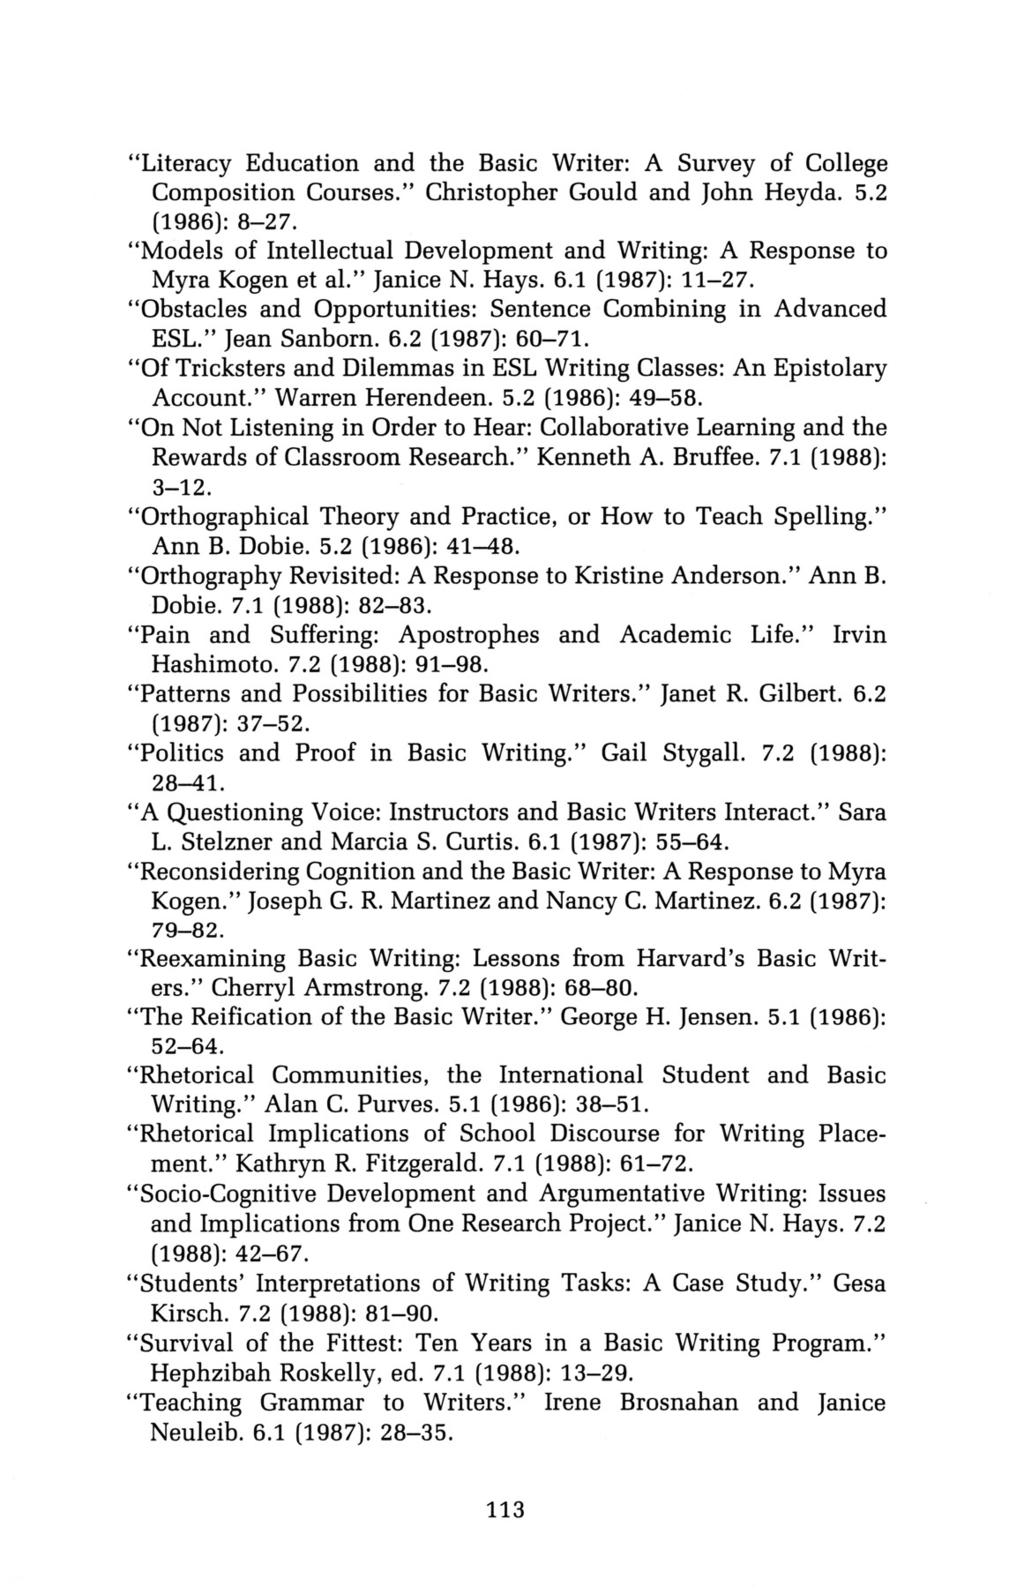 "Literacy Education and the Basic Writer: A Survey of College Composition Courses." Christopher Gould and John Heyda. 5.2 (1986): 8-27.